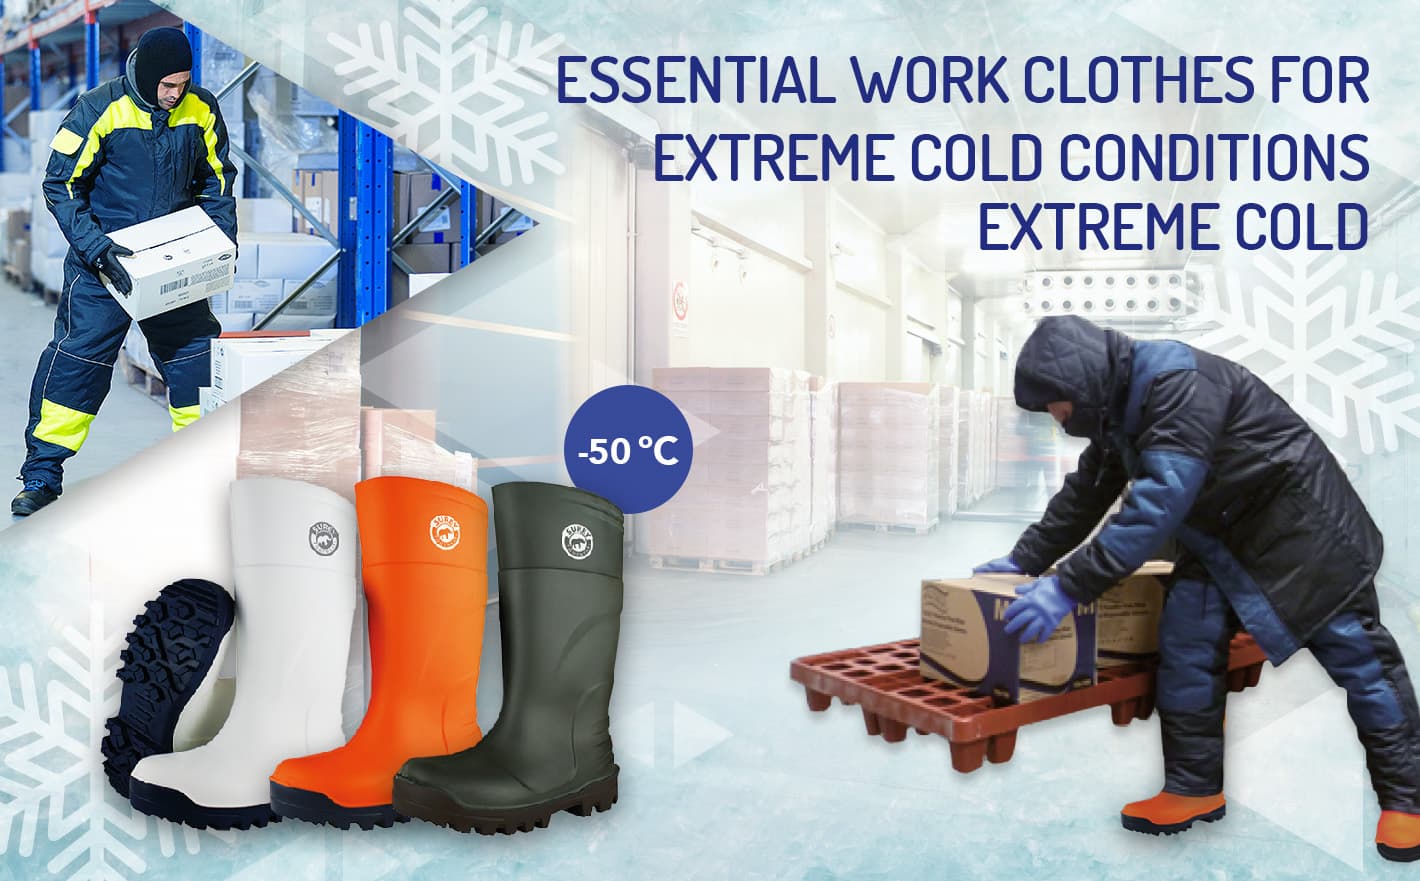 Must-have work clothes for extreme cold conditions